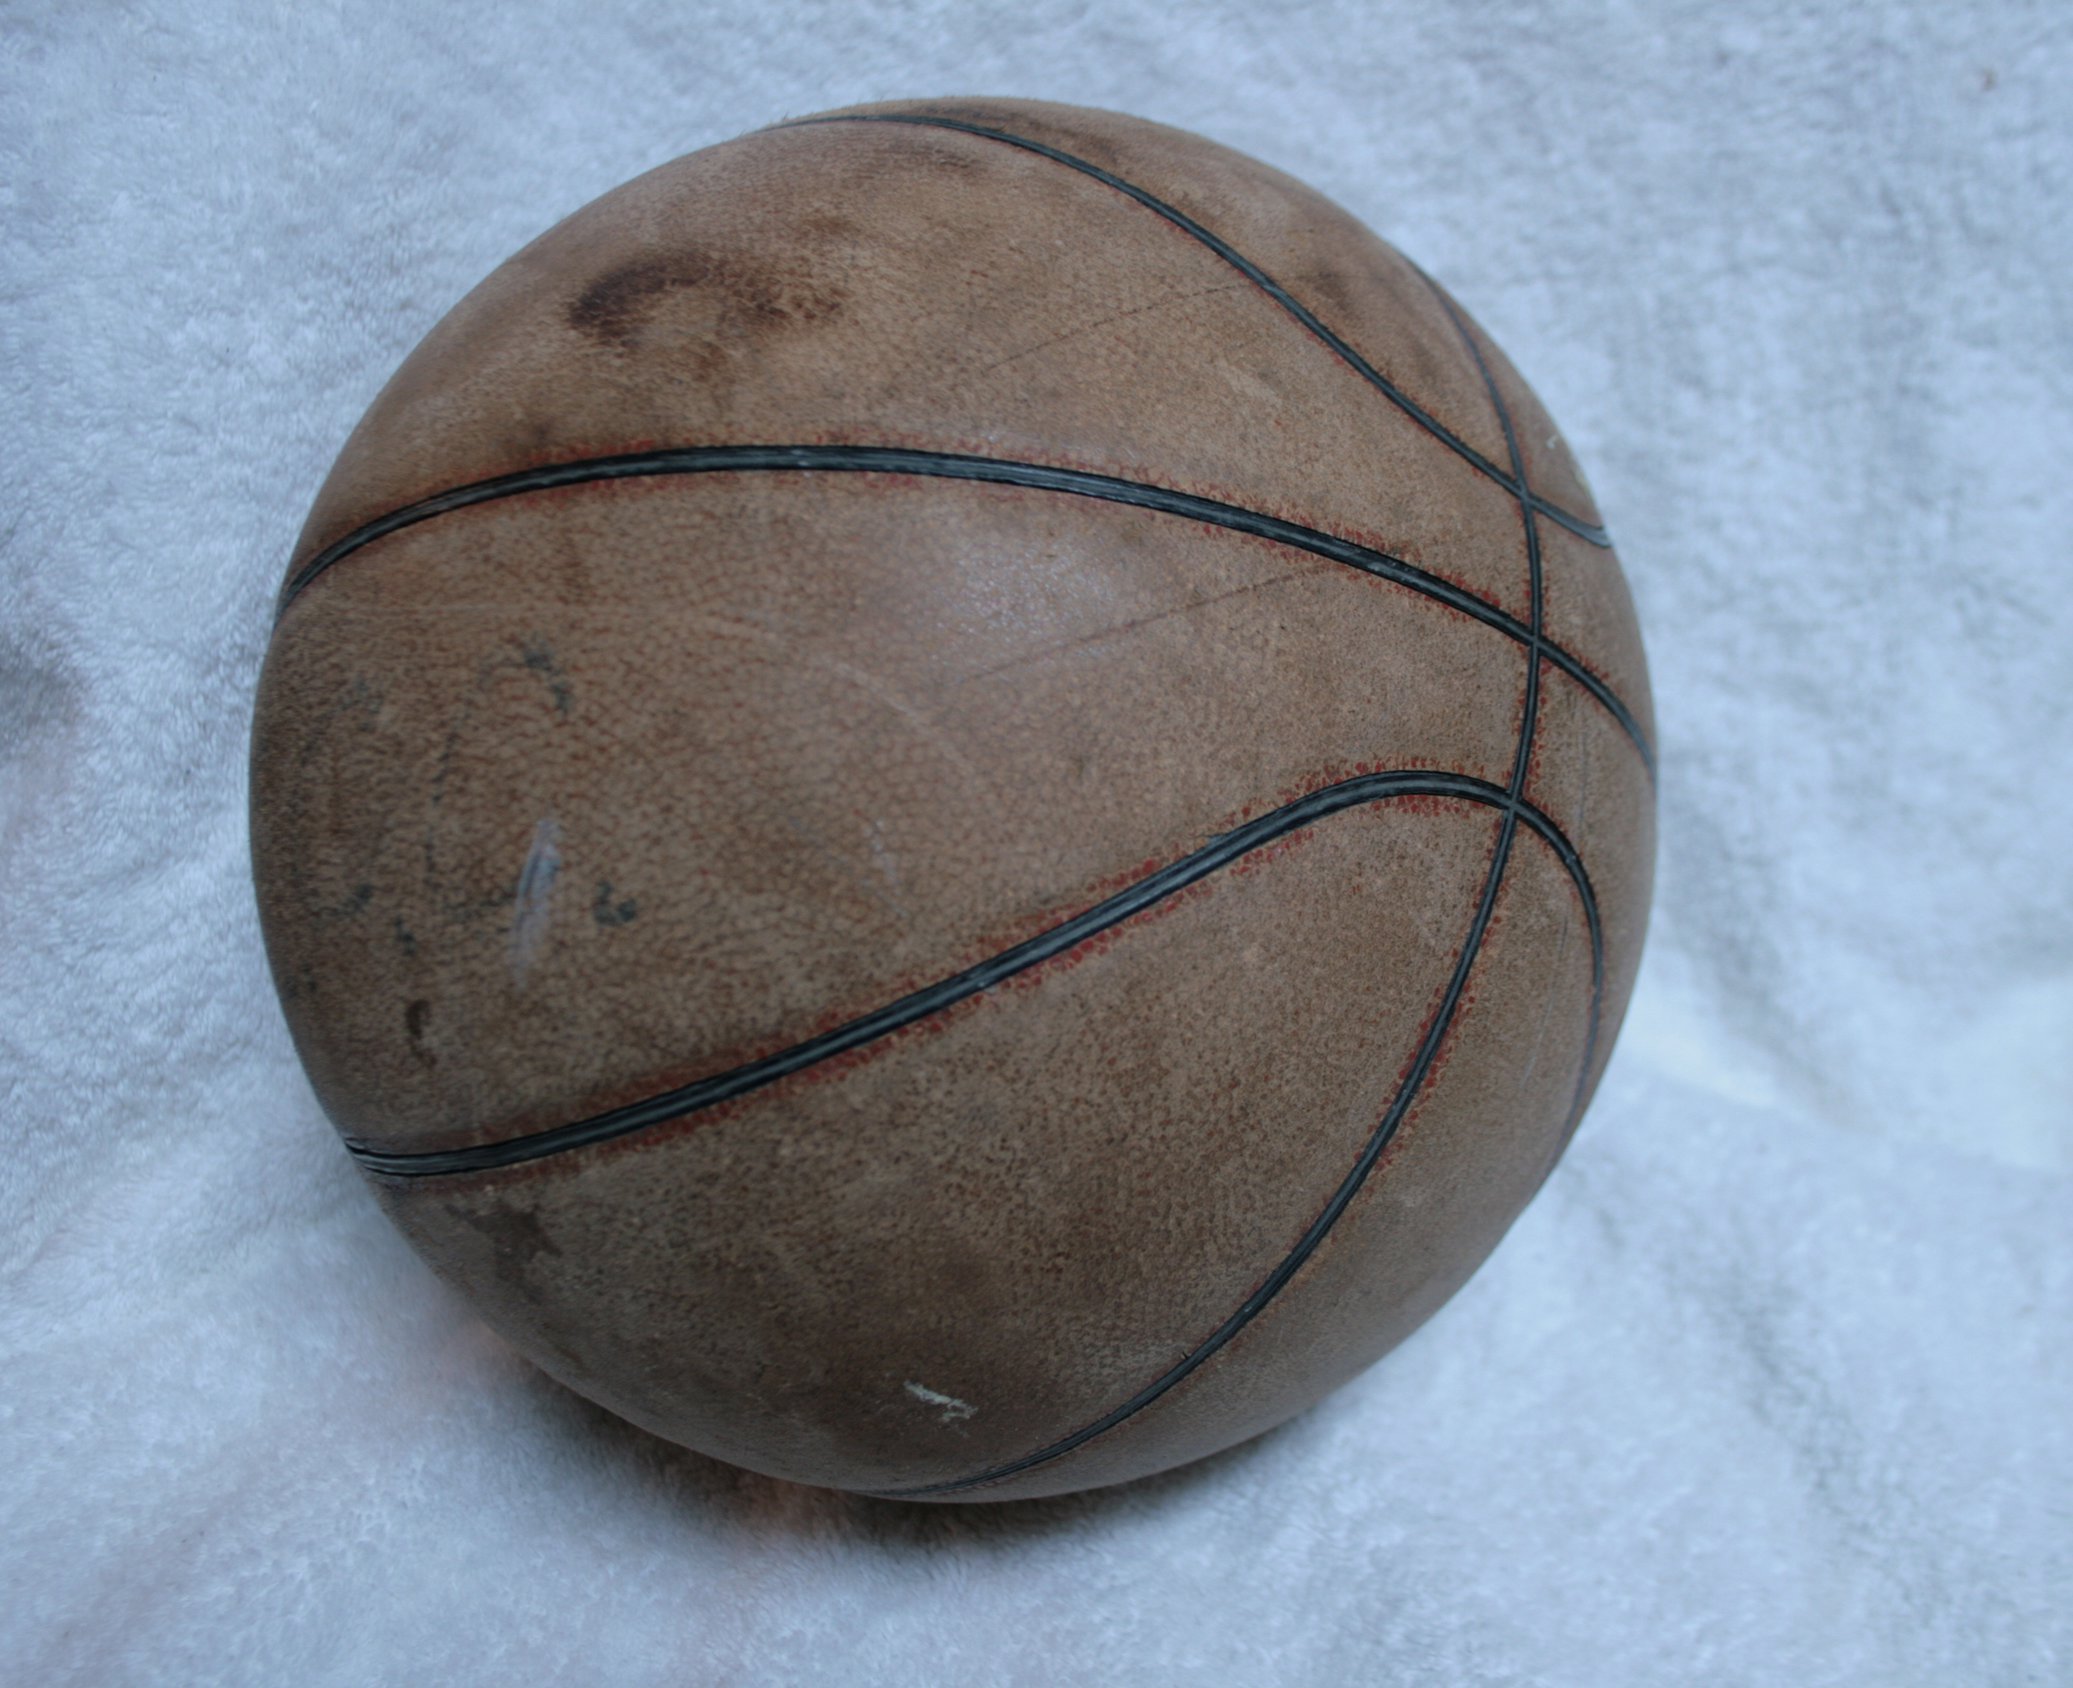 Old basketball by Arctic-Stock on DeviantArt